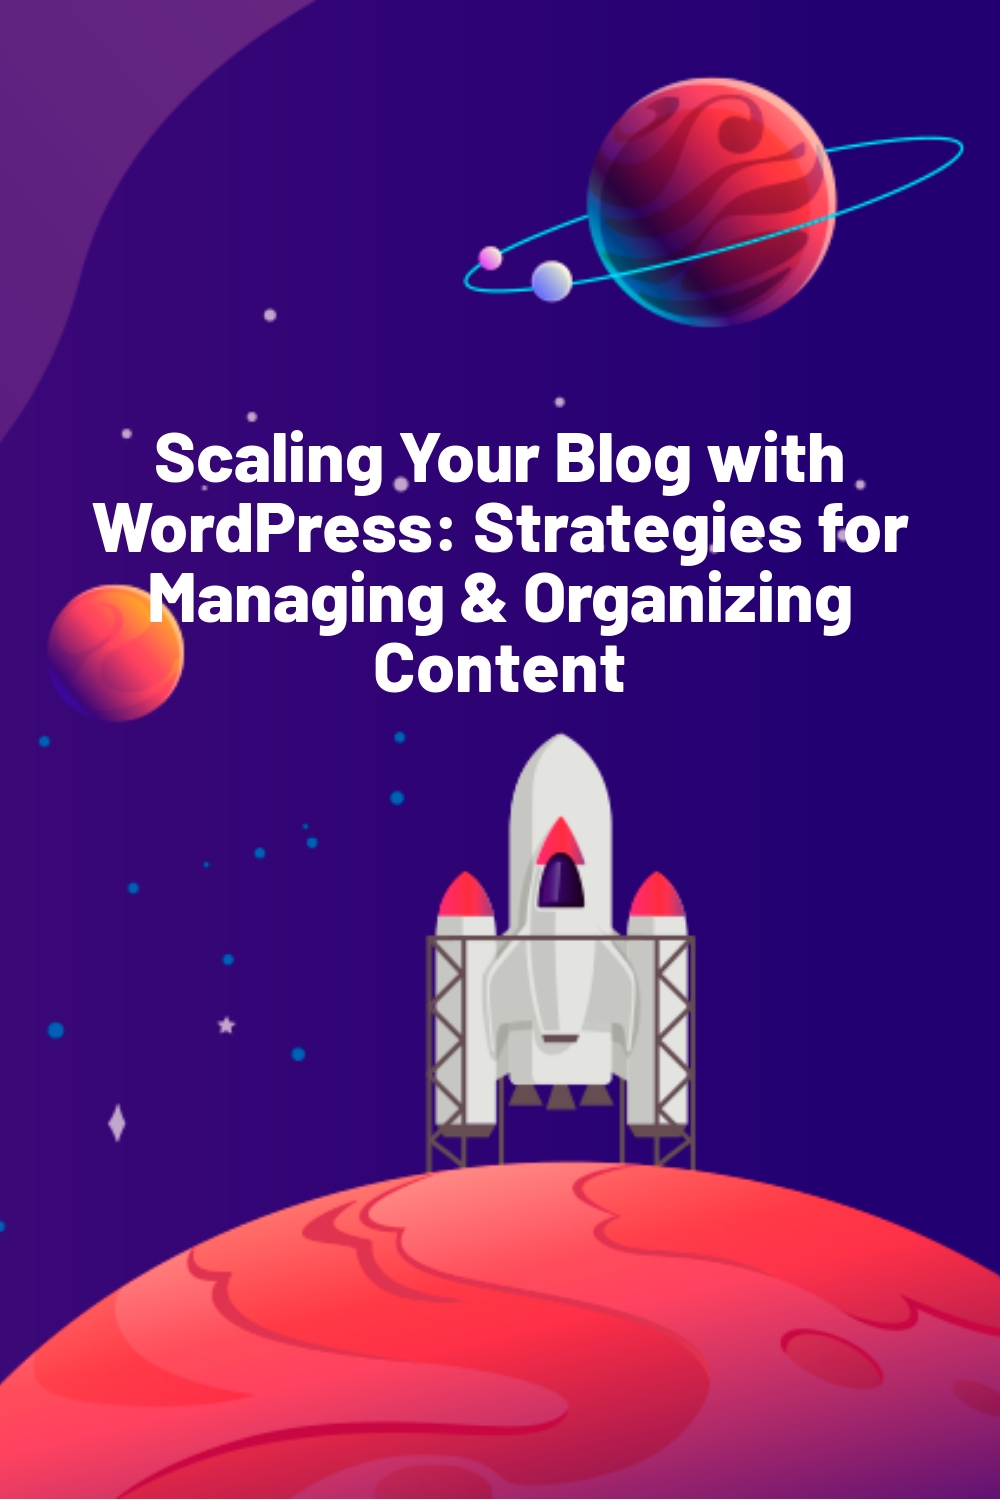 Scaling Your Blog with WordPress: Strategies for Managing & Organizing Content